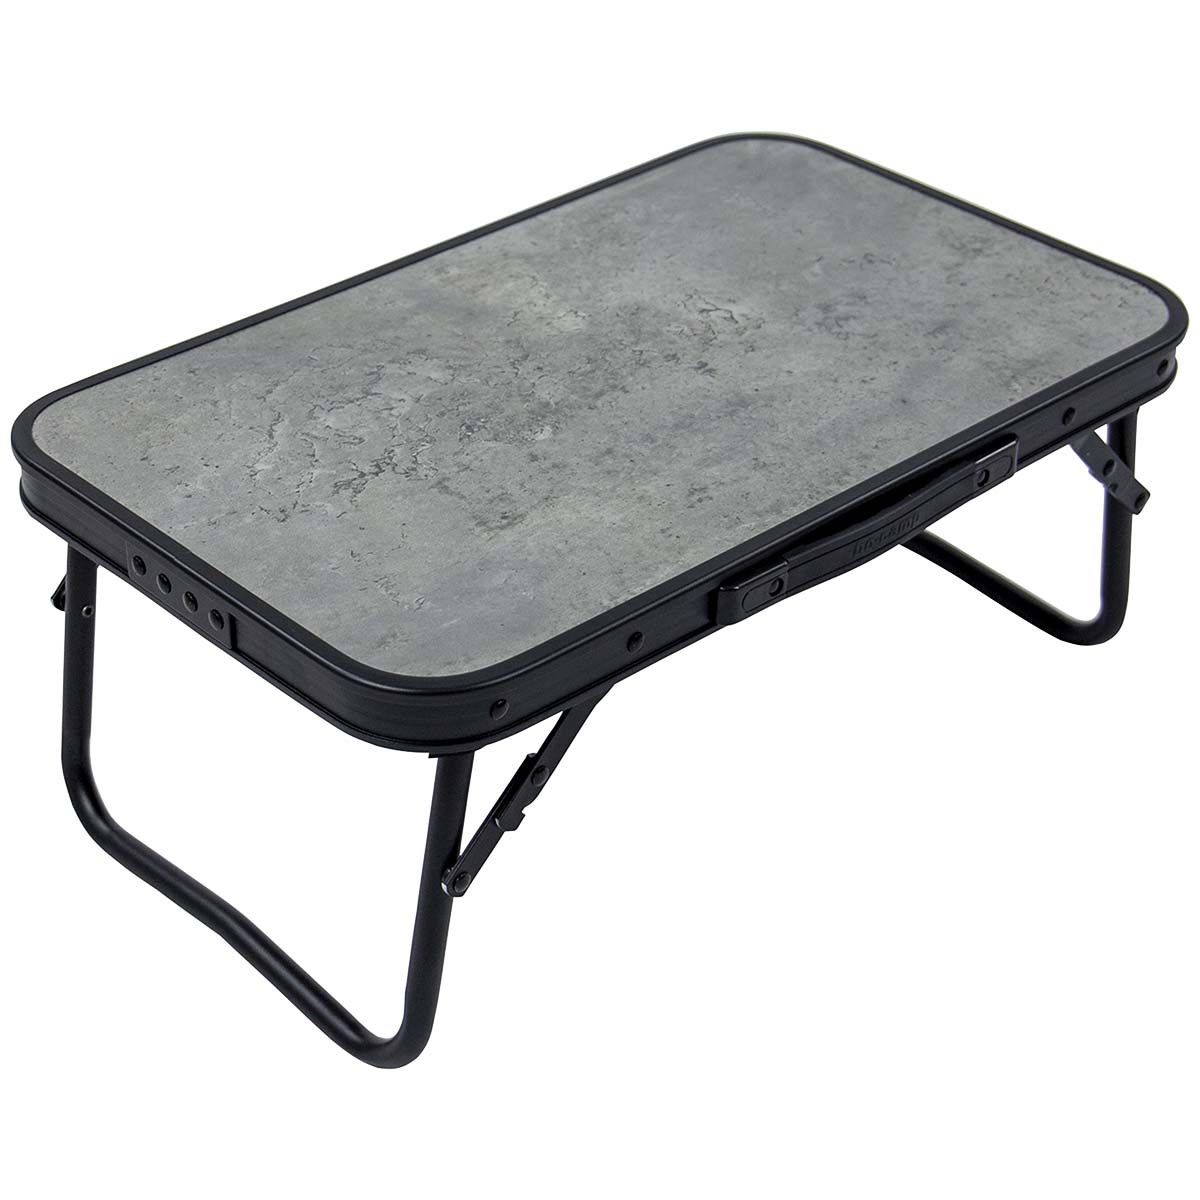 1404180 A stylish aluminum folding table with an industrial look and concrete-look table top. The table is very compact to store due to the folding legs. In addition, the table is equipped with a net under the MDF table top to store items.